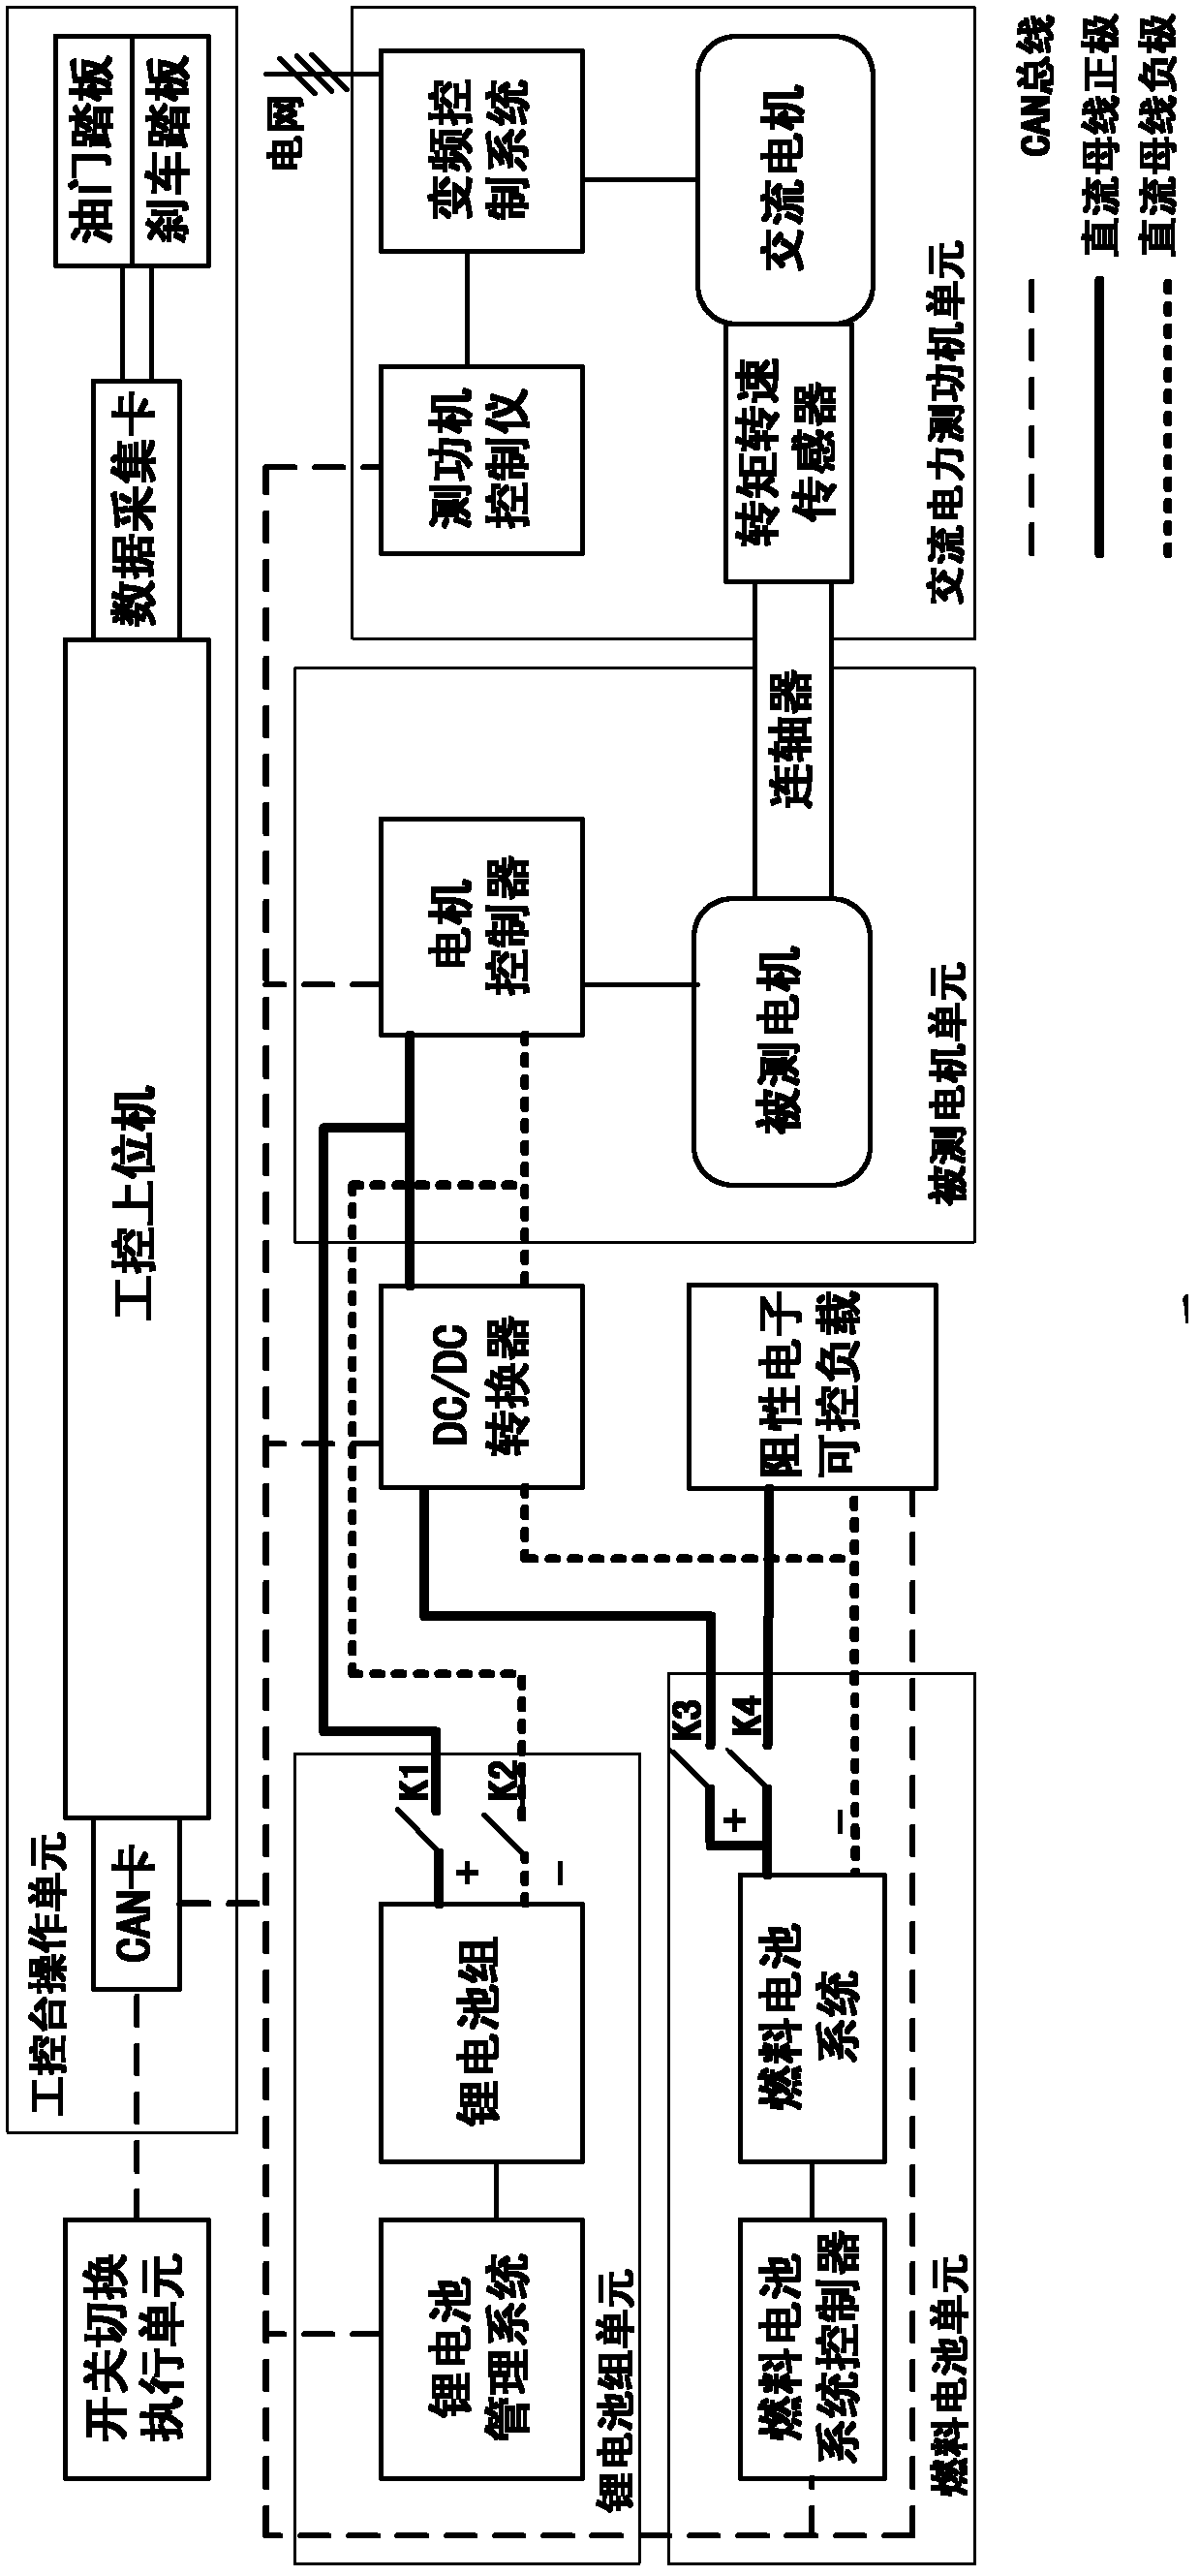 Comprehensive test platform and method for dynamic system of fuel cell hybrid electric vehicle